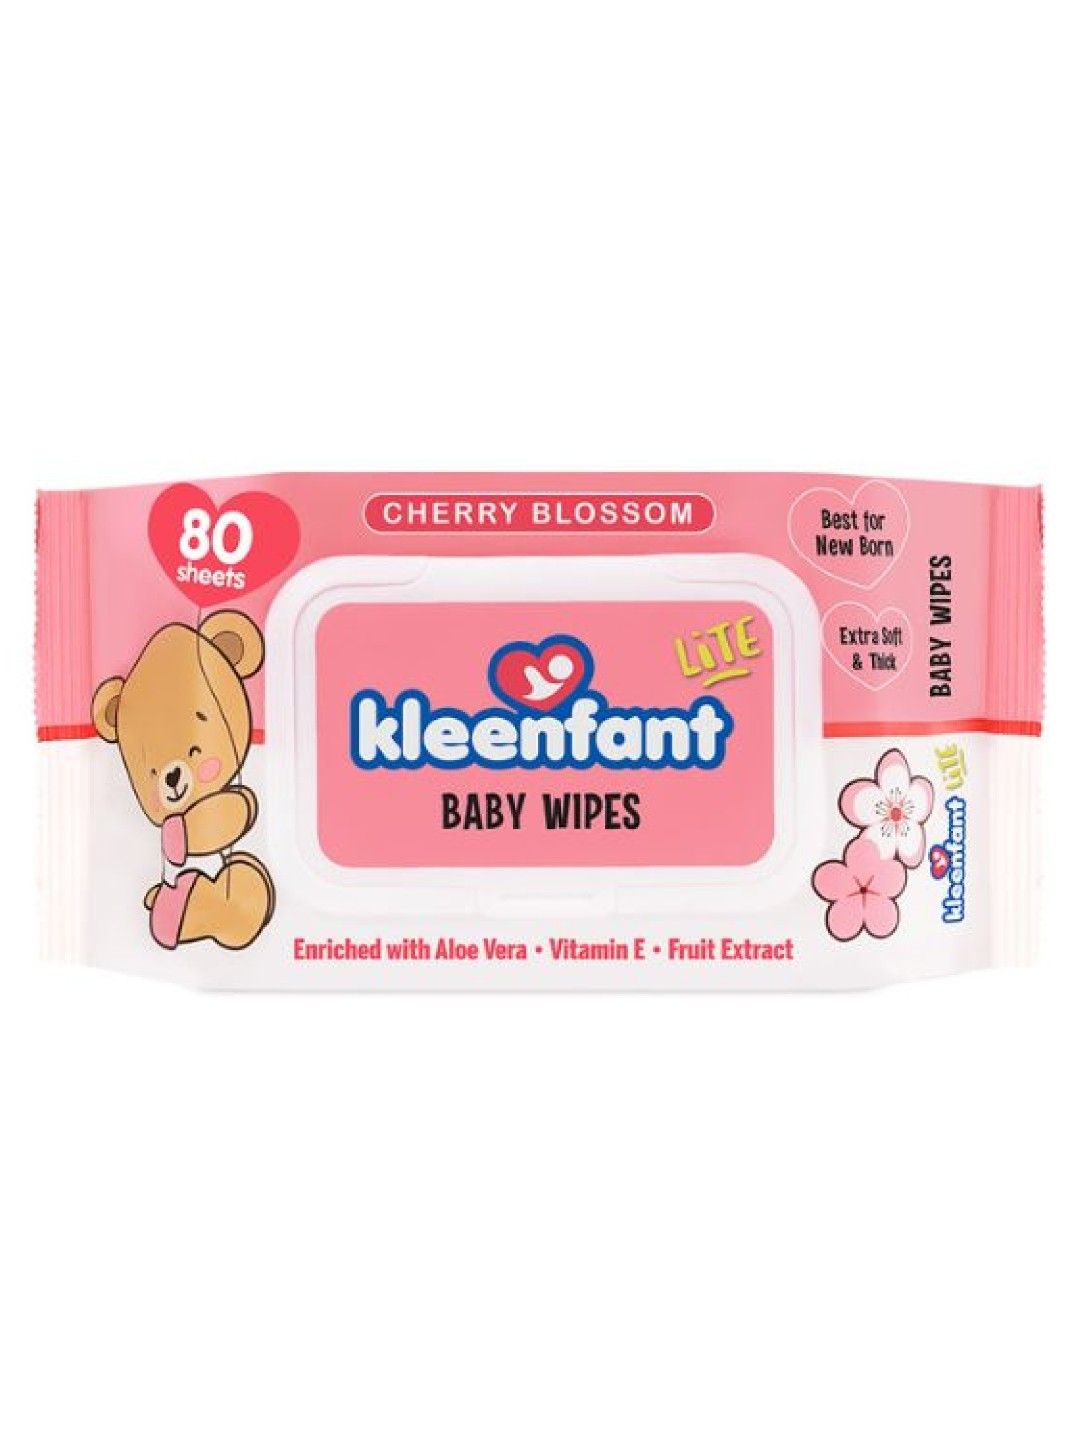 Kleenfant Lite Cherry Blossom Scent Baby Wipes 80 sheets (No Color- Image 1)